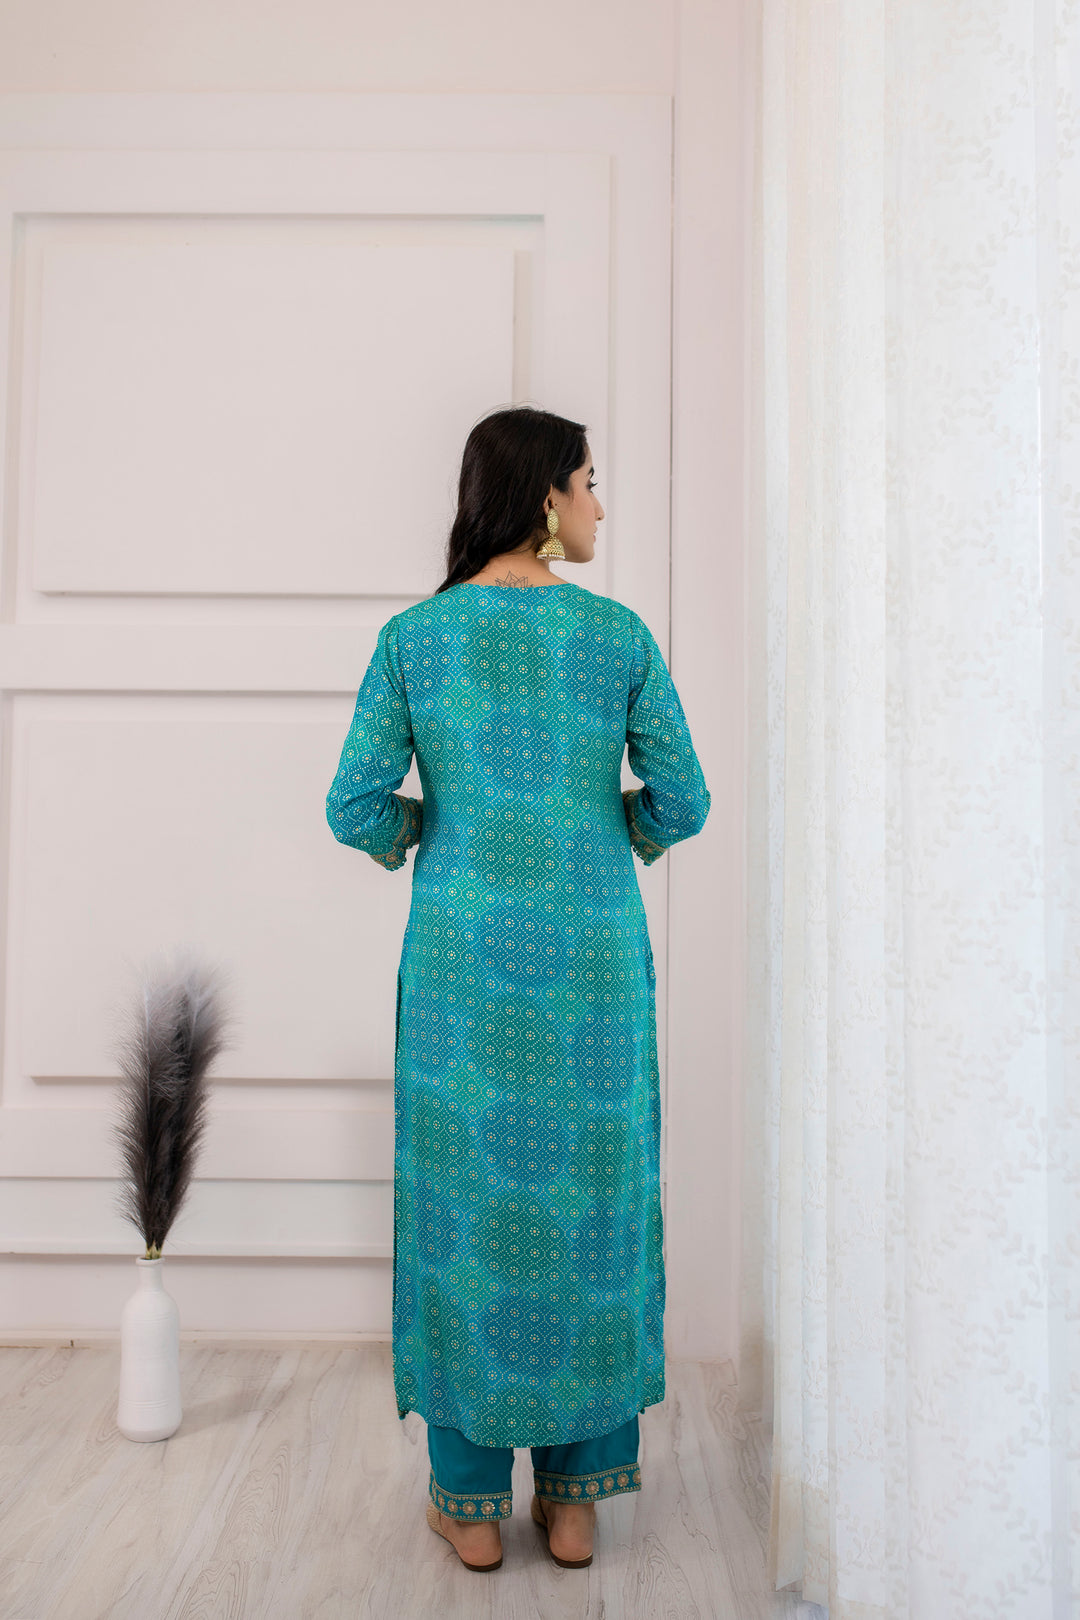 Women's Rayon Turquoise or Green Straight Kurta, Pant and Dupatta With Fancy Potli Set